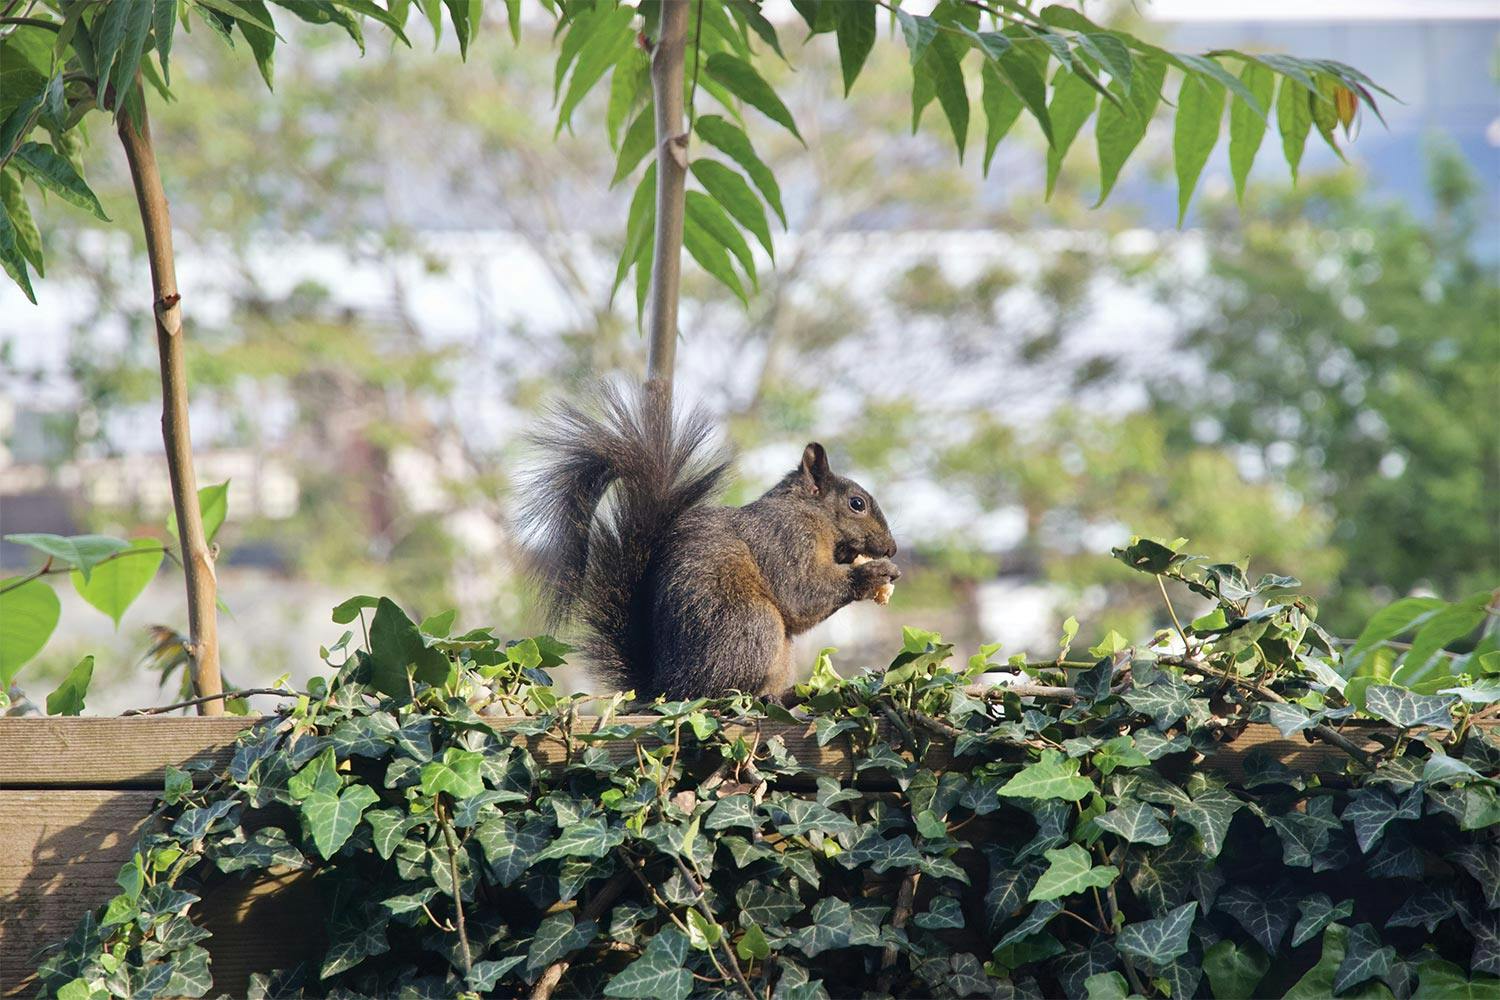 A brown squirrel sits atop a wooden, vine-covered fence, eating what looks like a nut.